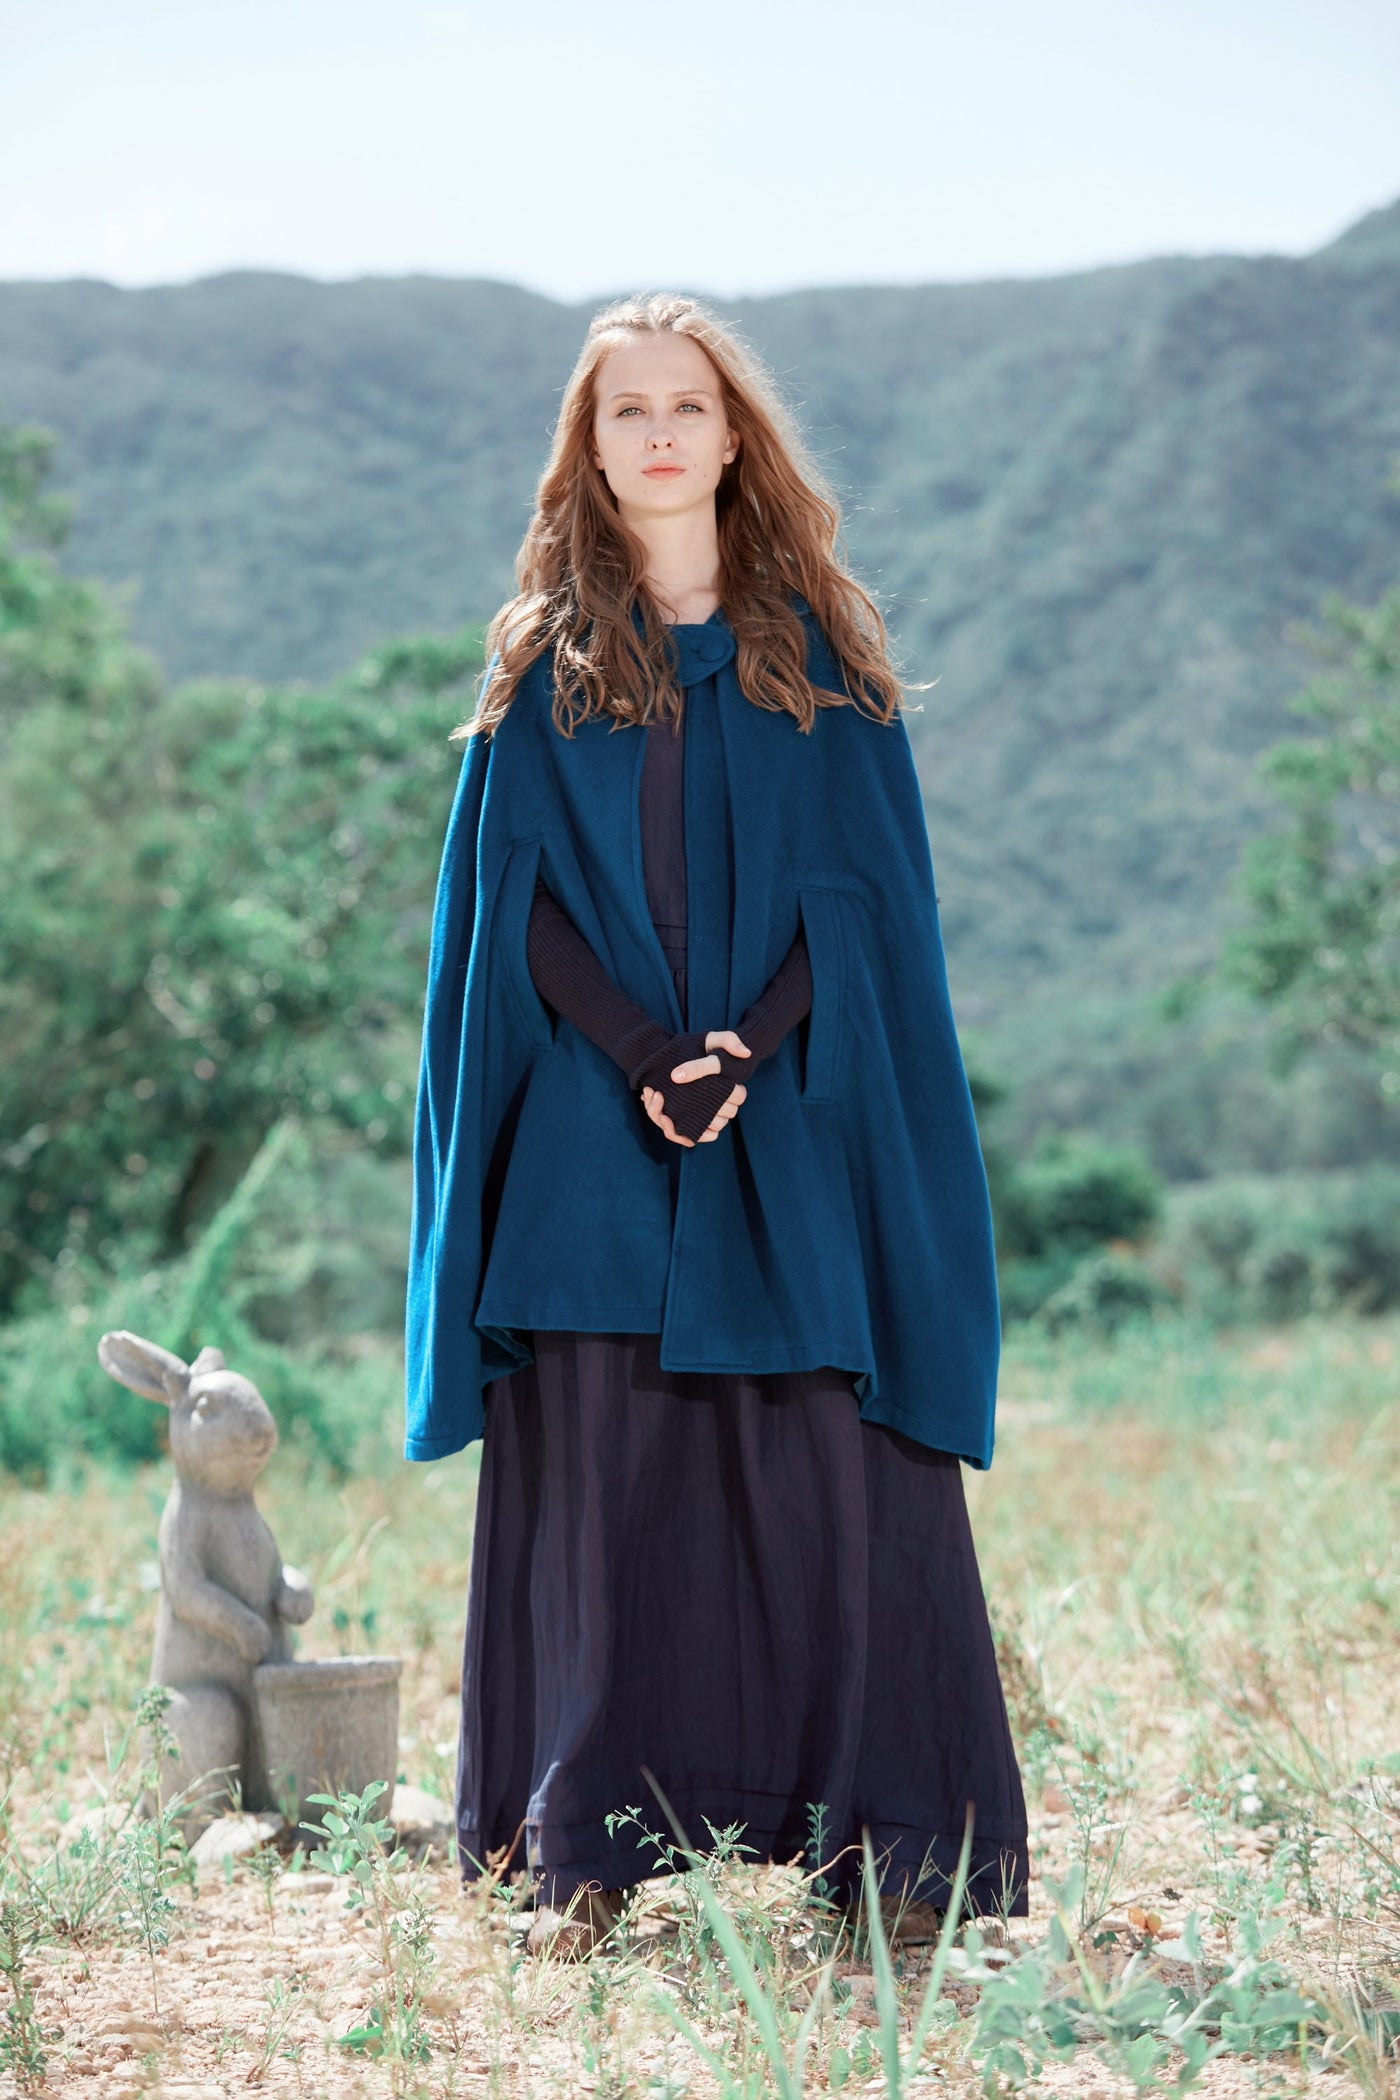 The New Yorker | Hooded Cashmere Cape